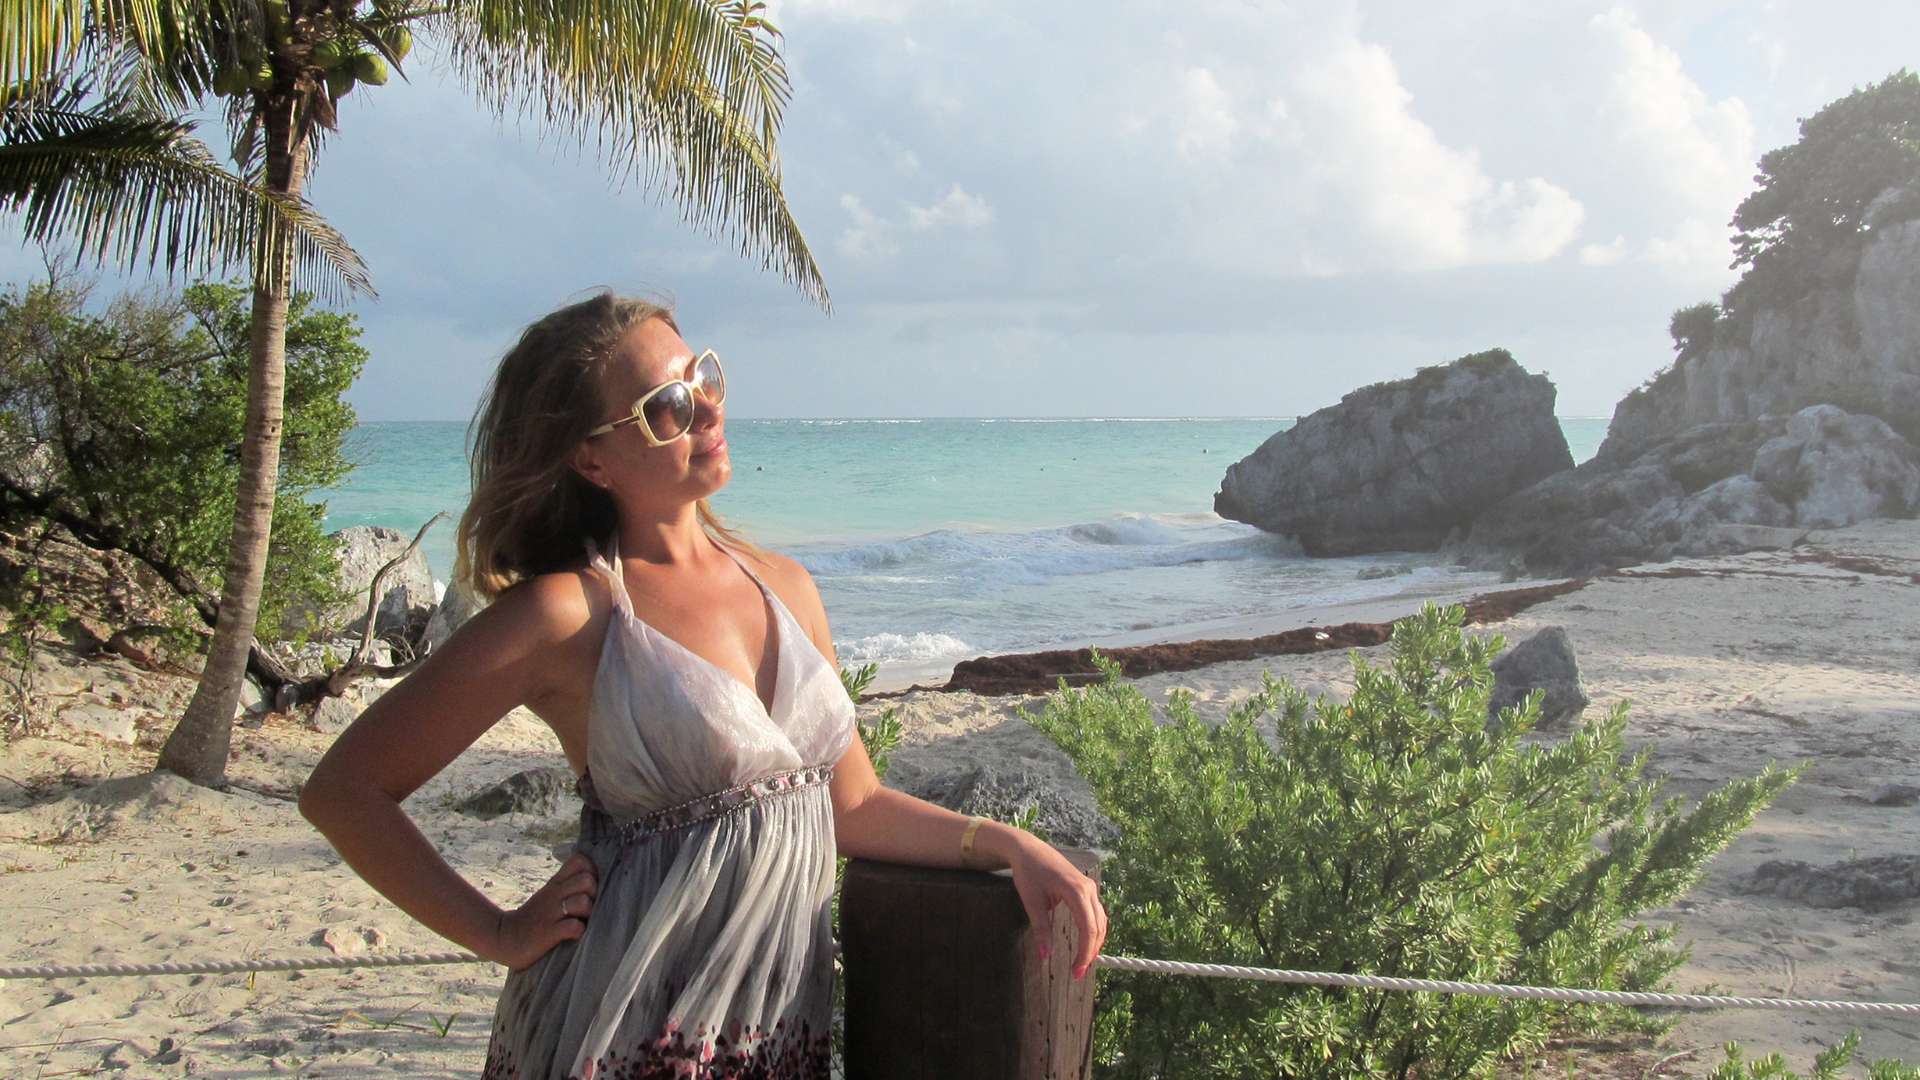 A Comprehensive Guide to Traveling Alone in Cancun